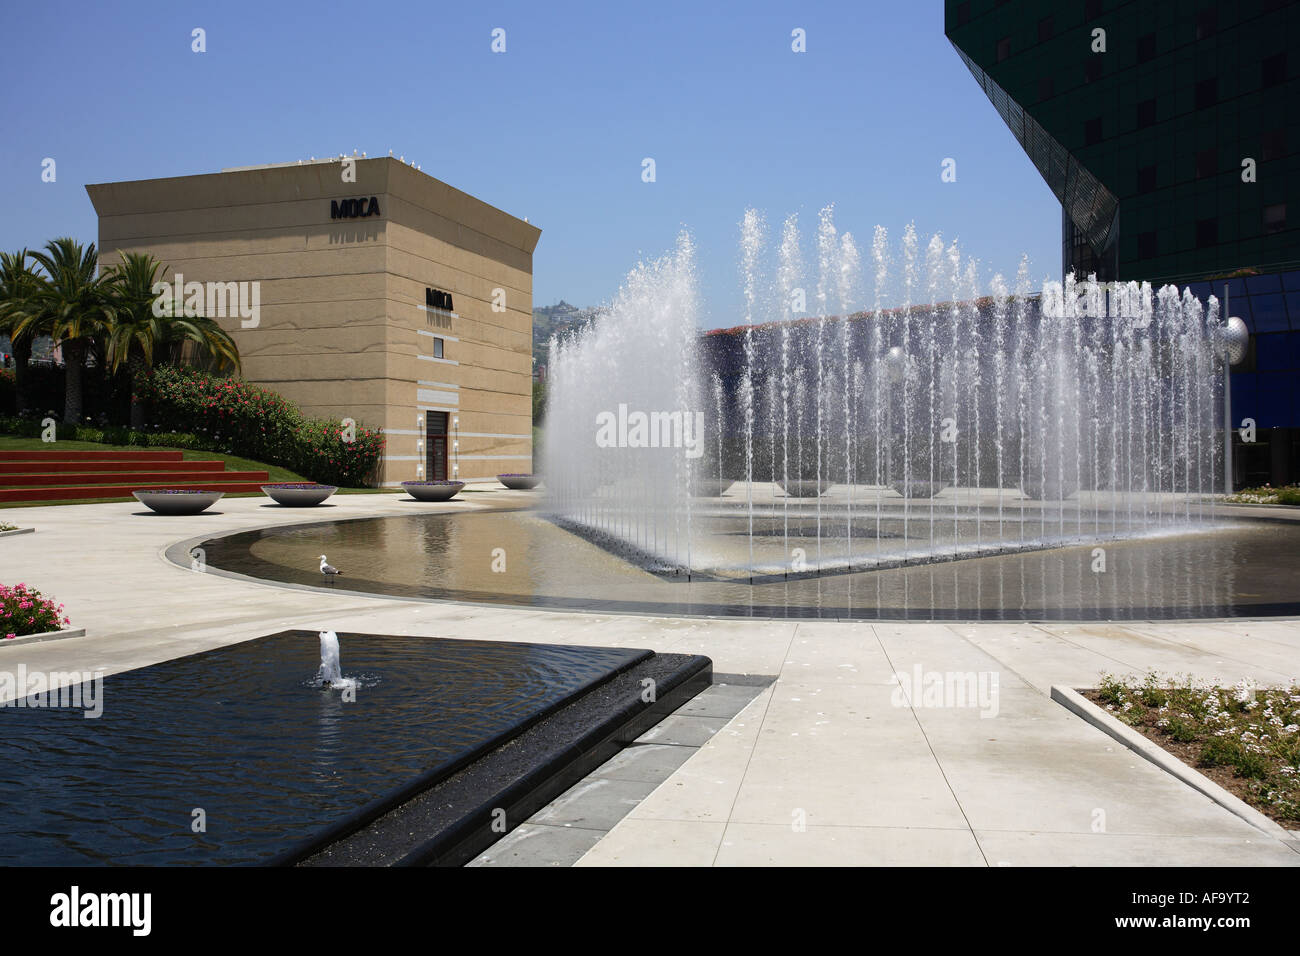 Pacific Design Center, West Hollywood, Los Angeles, California,U.S.A Stock Photo